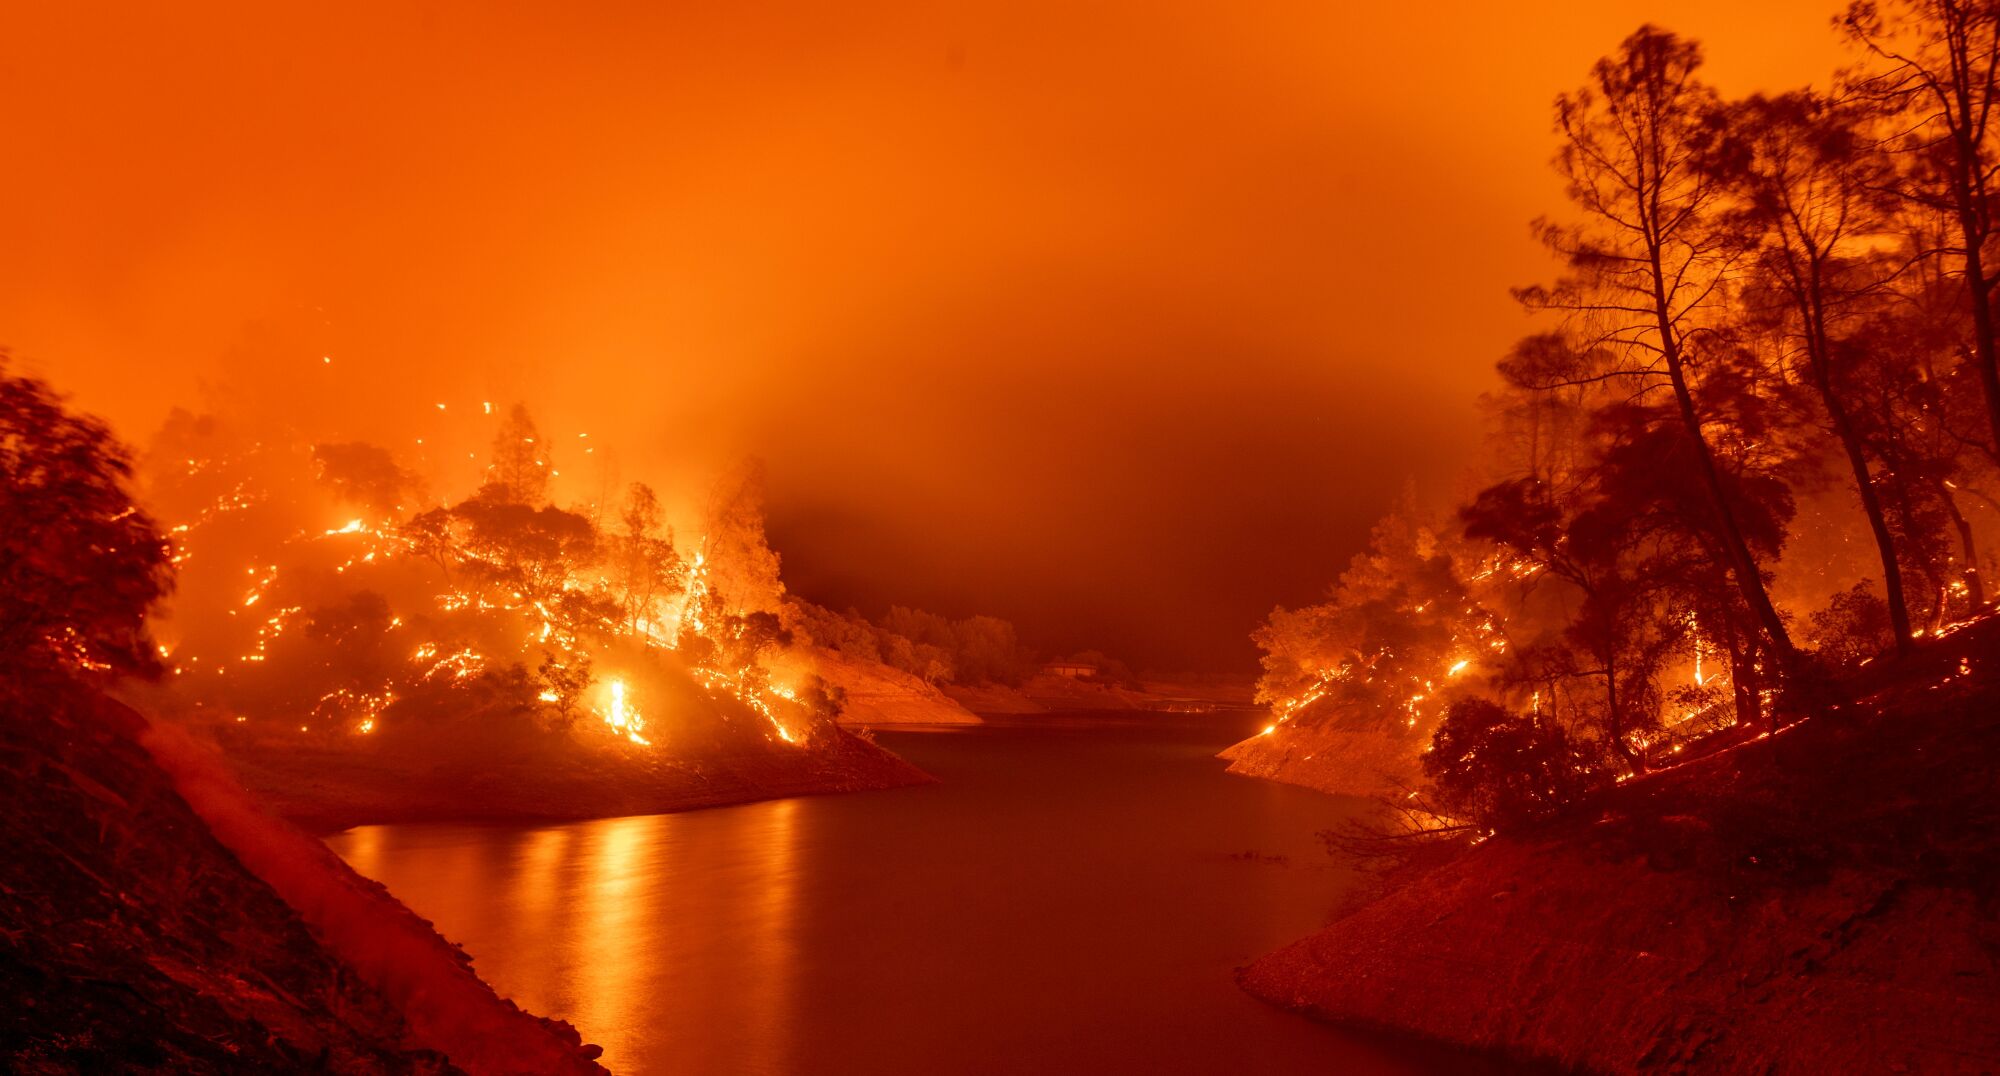 Flames consume both sides of a segment of Lake Berryessa in Napa County.